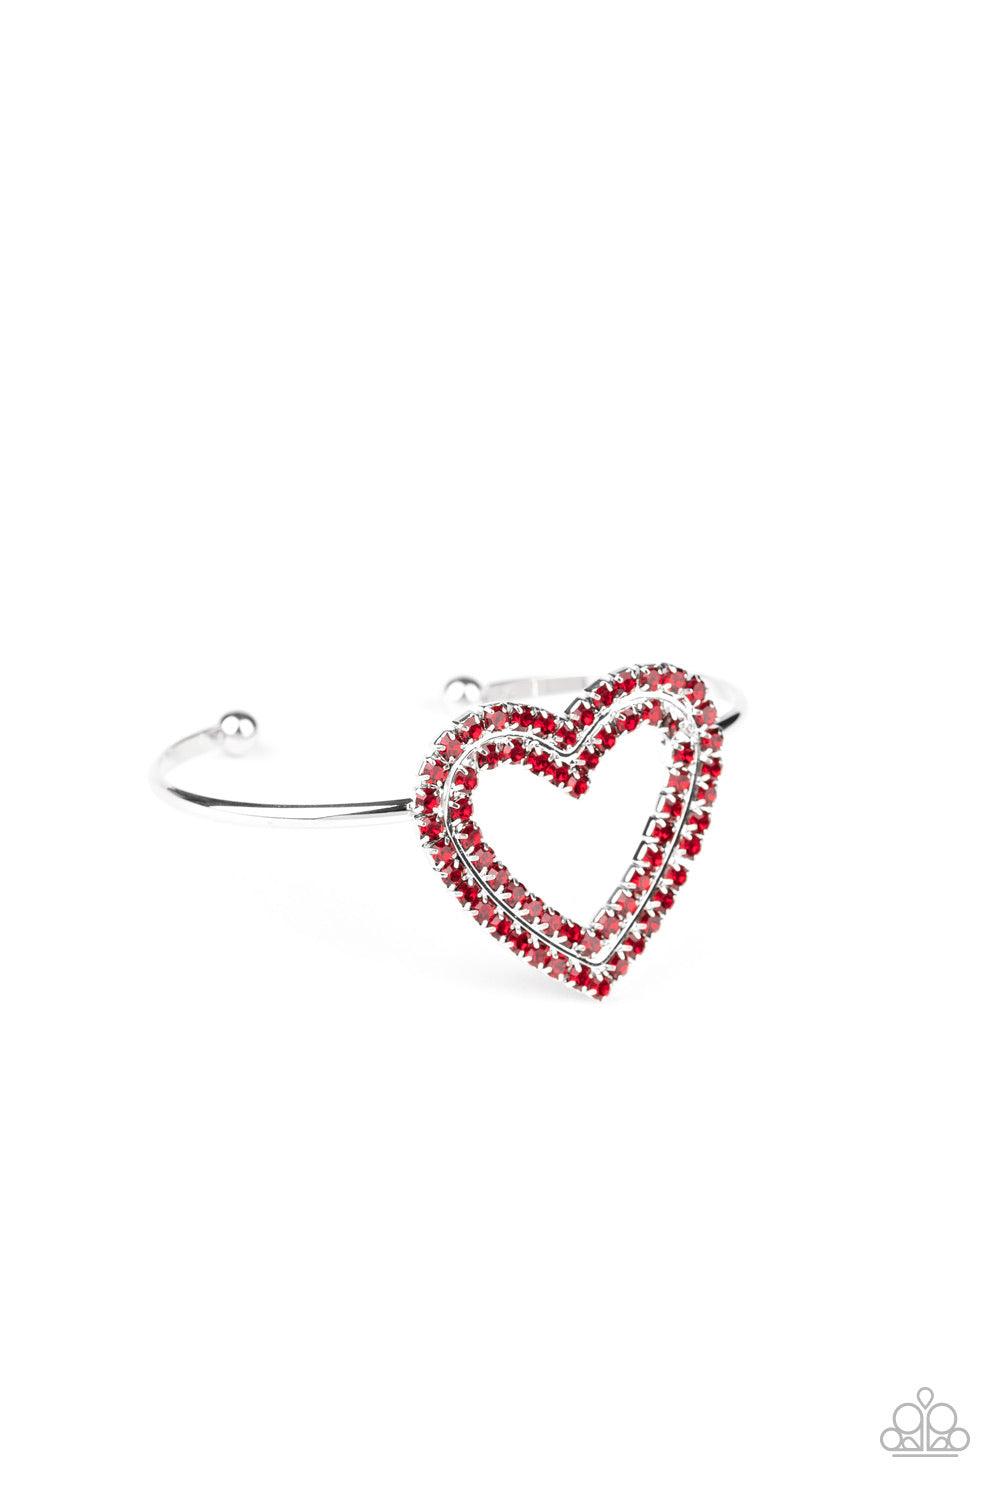 Paparazzi Accessories Heart Opener - Red Two rows of glittery red rhinestones stack into a sparkling heart atop a dainty silver cuff for a charming look. Jewelry